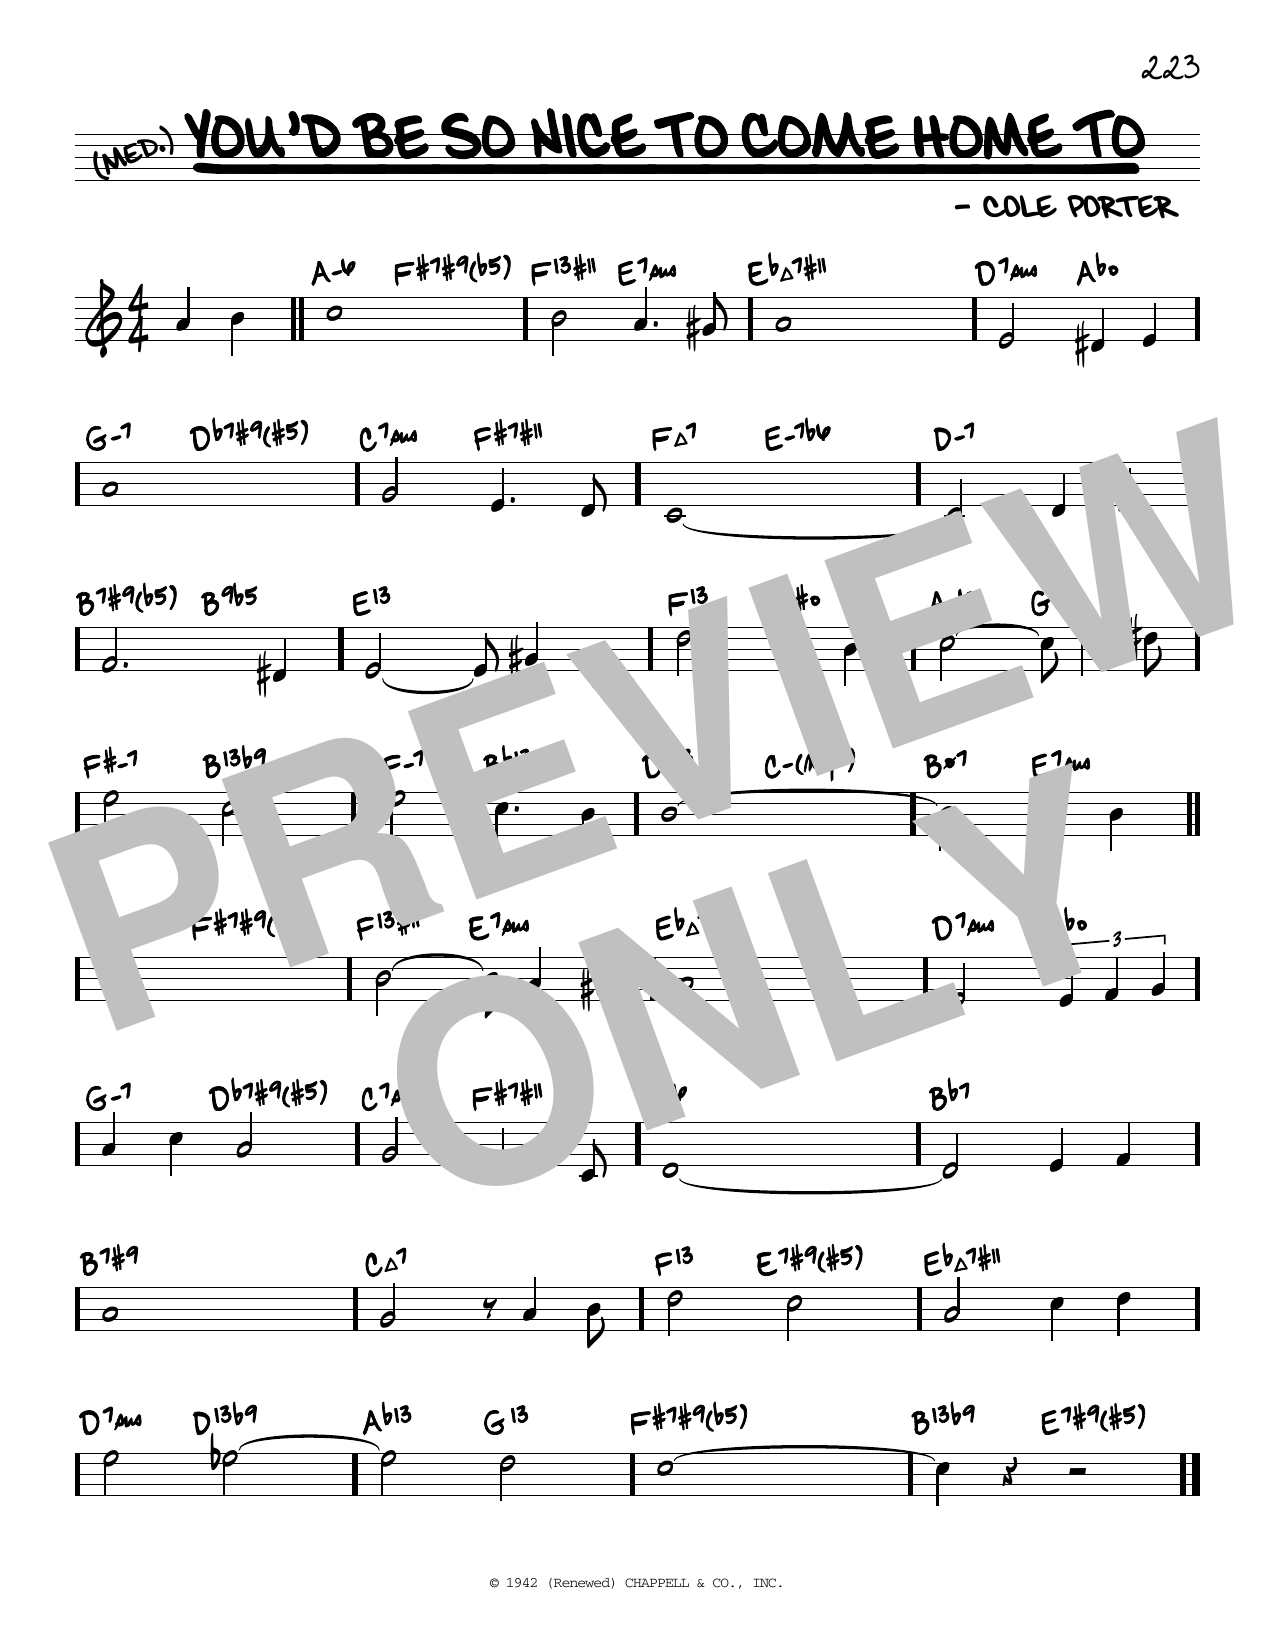 Download Cole Porter You'd Be So Nice To Come Home To (arr. Sheet Music